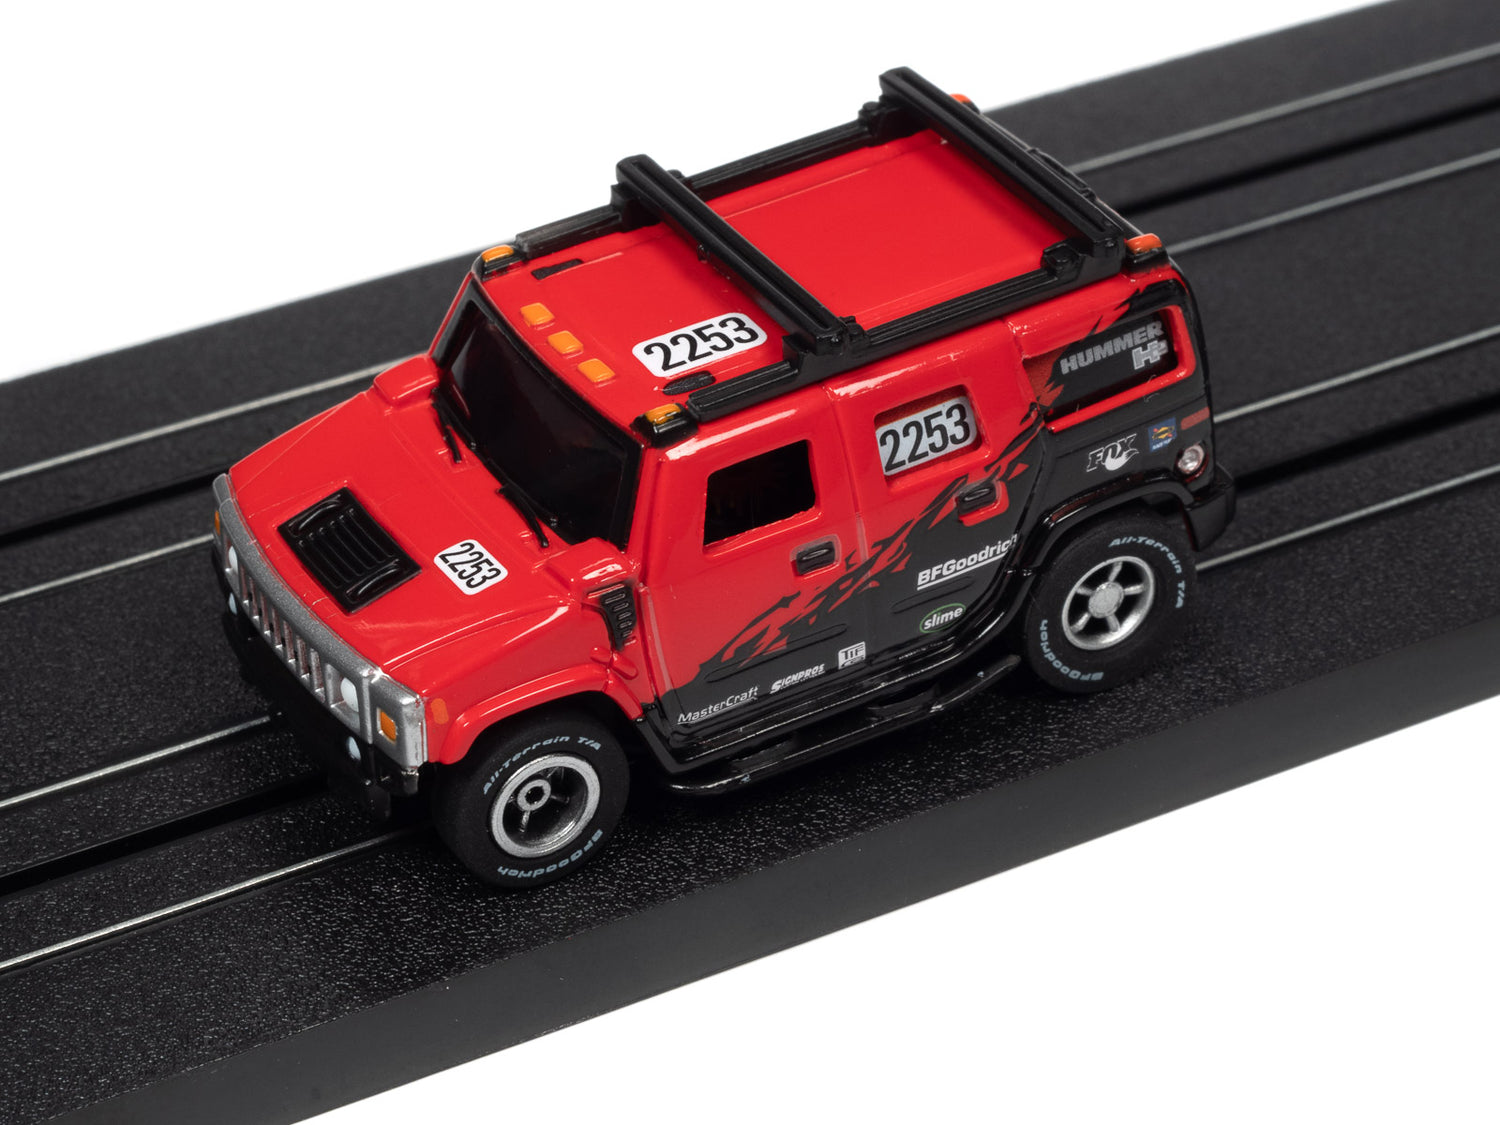 Auto World Xtraction Rally 2005 Hummer H2 (red) HO Scale Slot Car